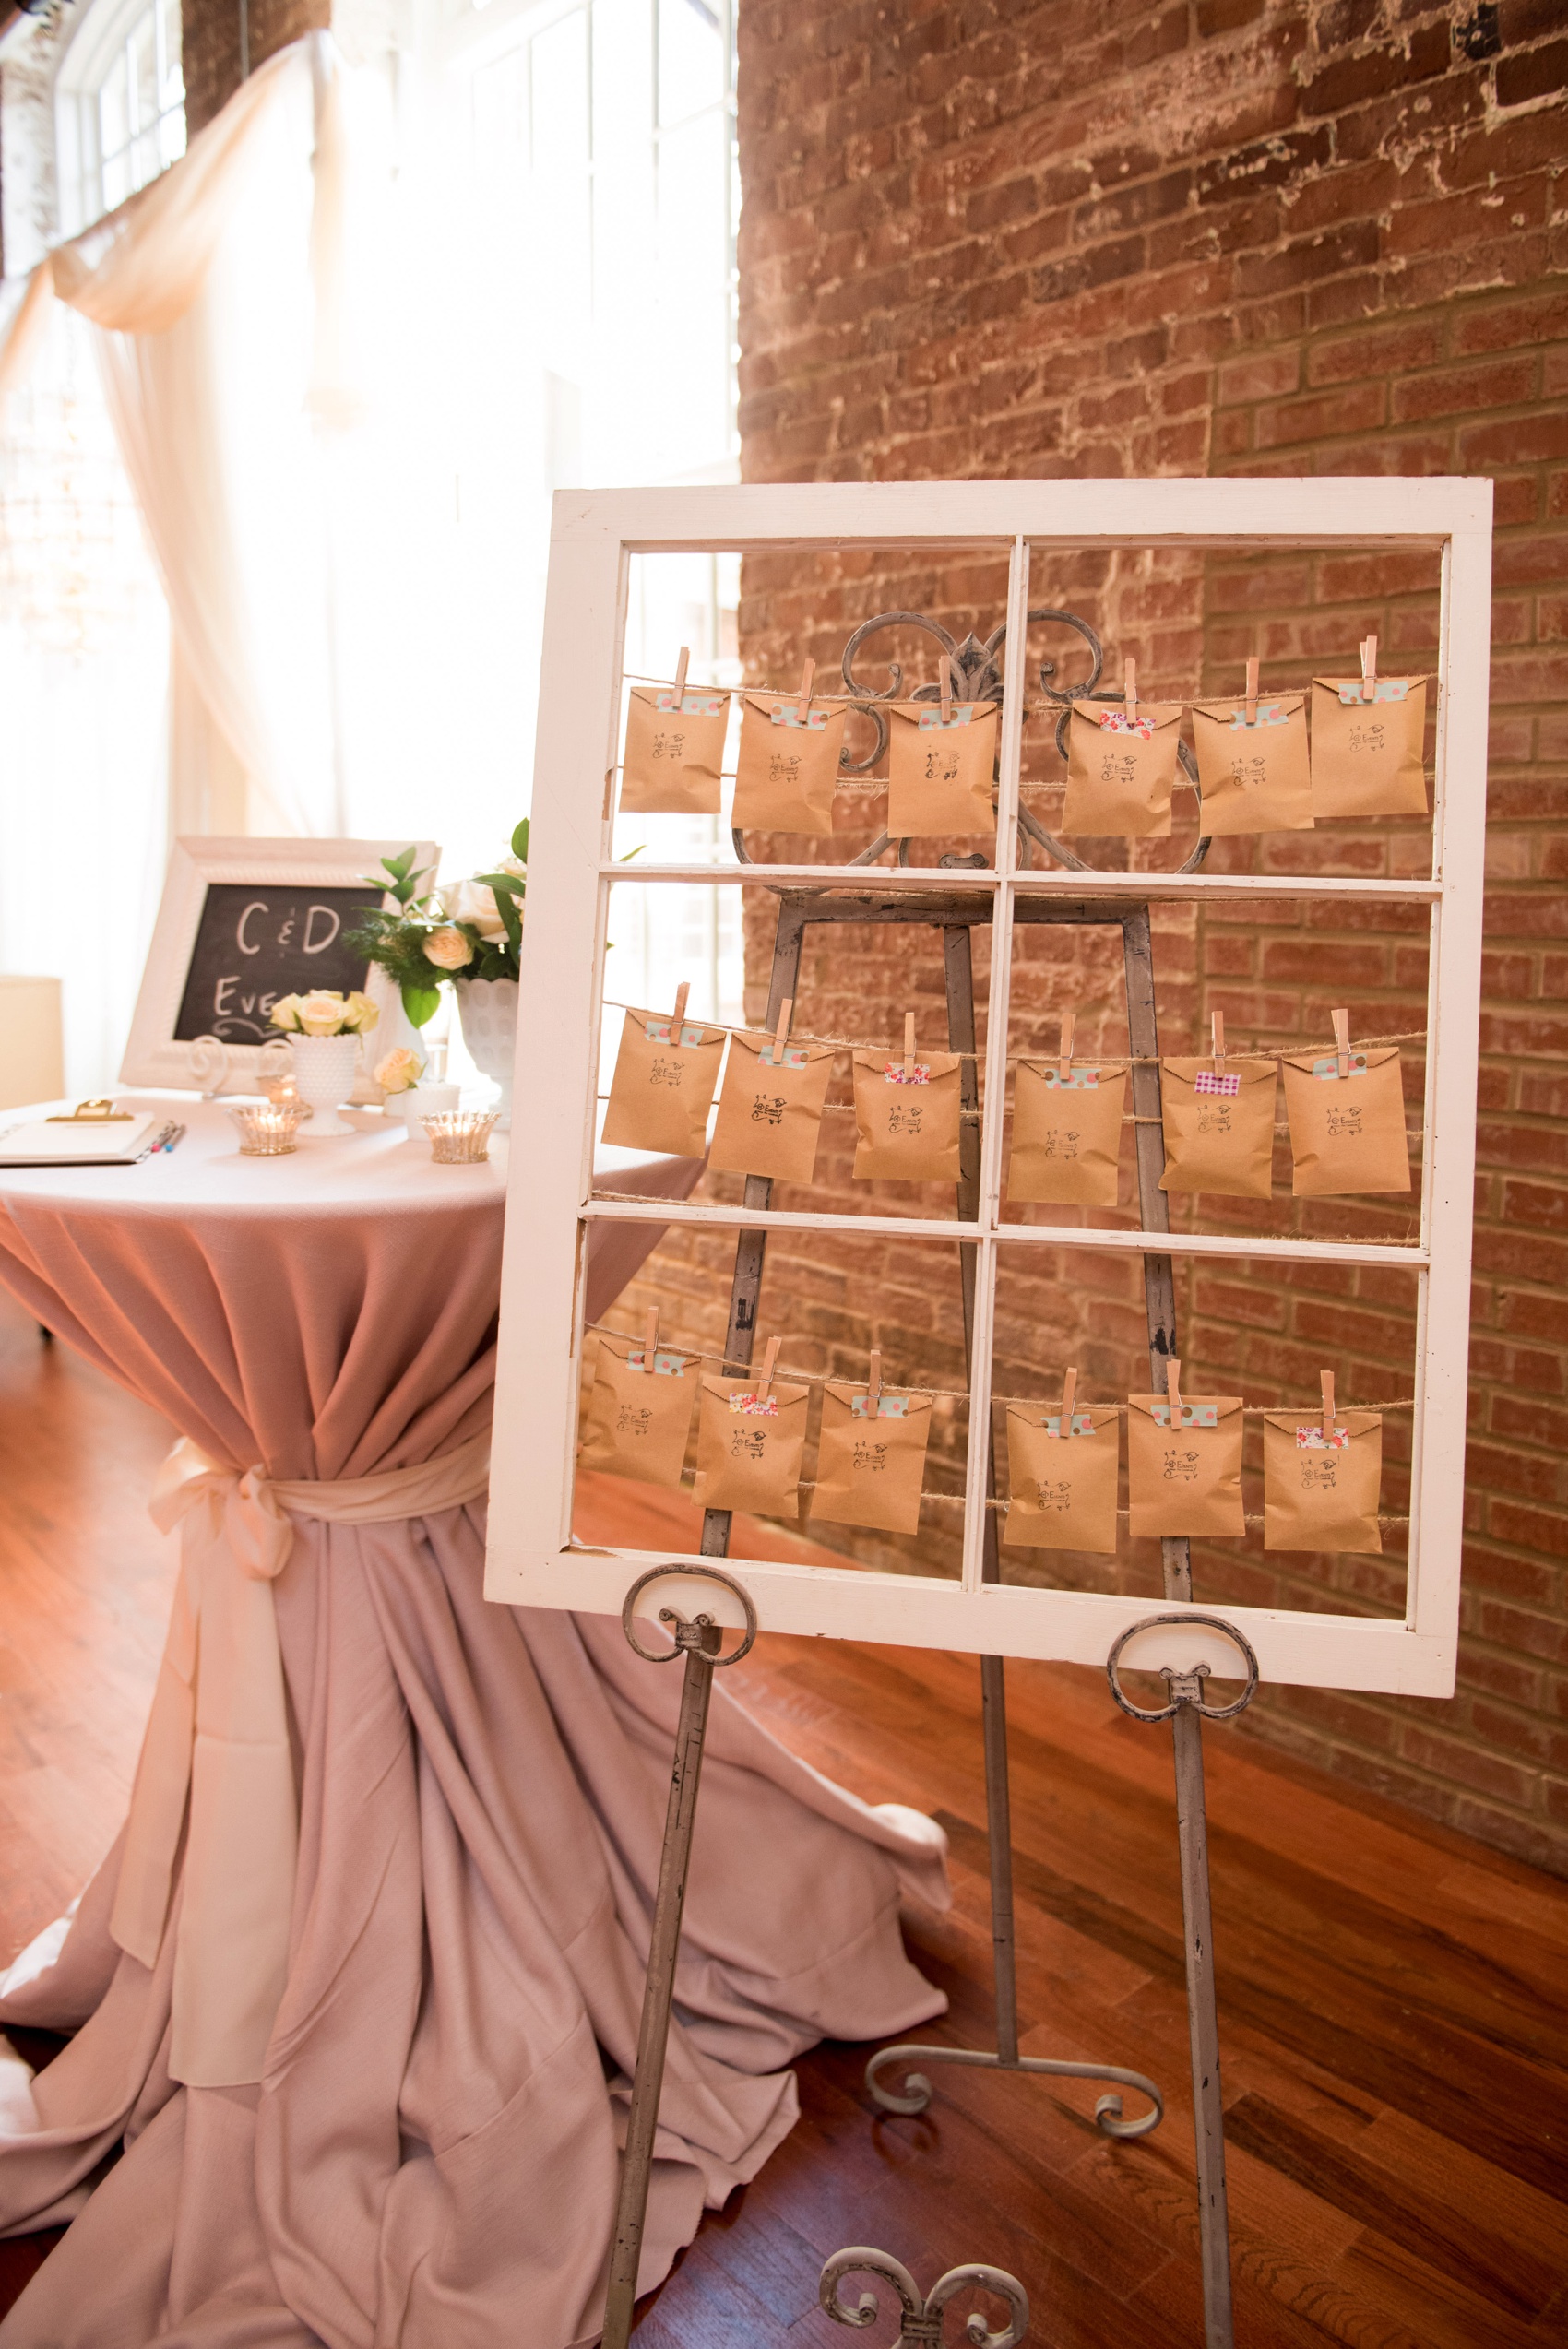 The Cloth Mill North Carolina wedding vendor showcase. Raleigh, Durham and Hillsborough vendors at a rustic, modern location. Window pane card display for C+D Events.